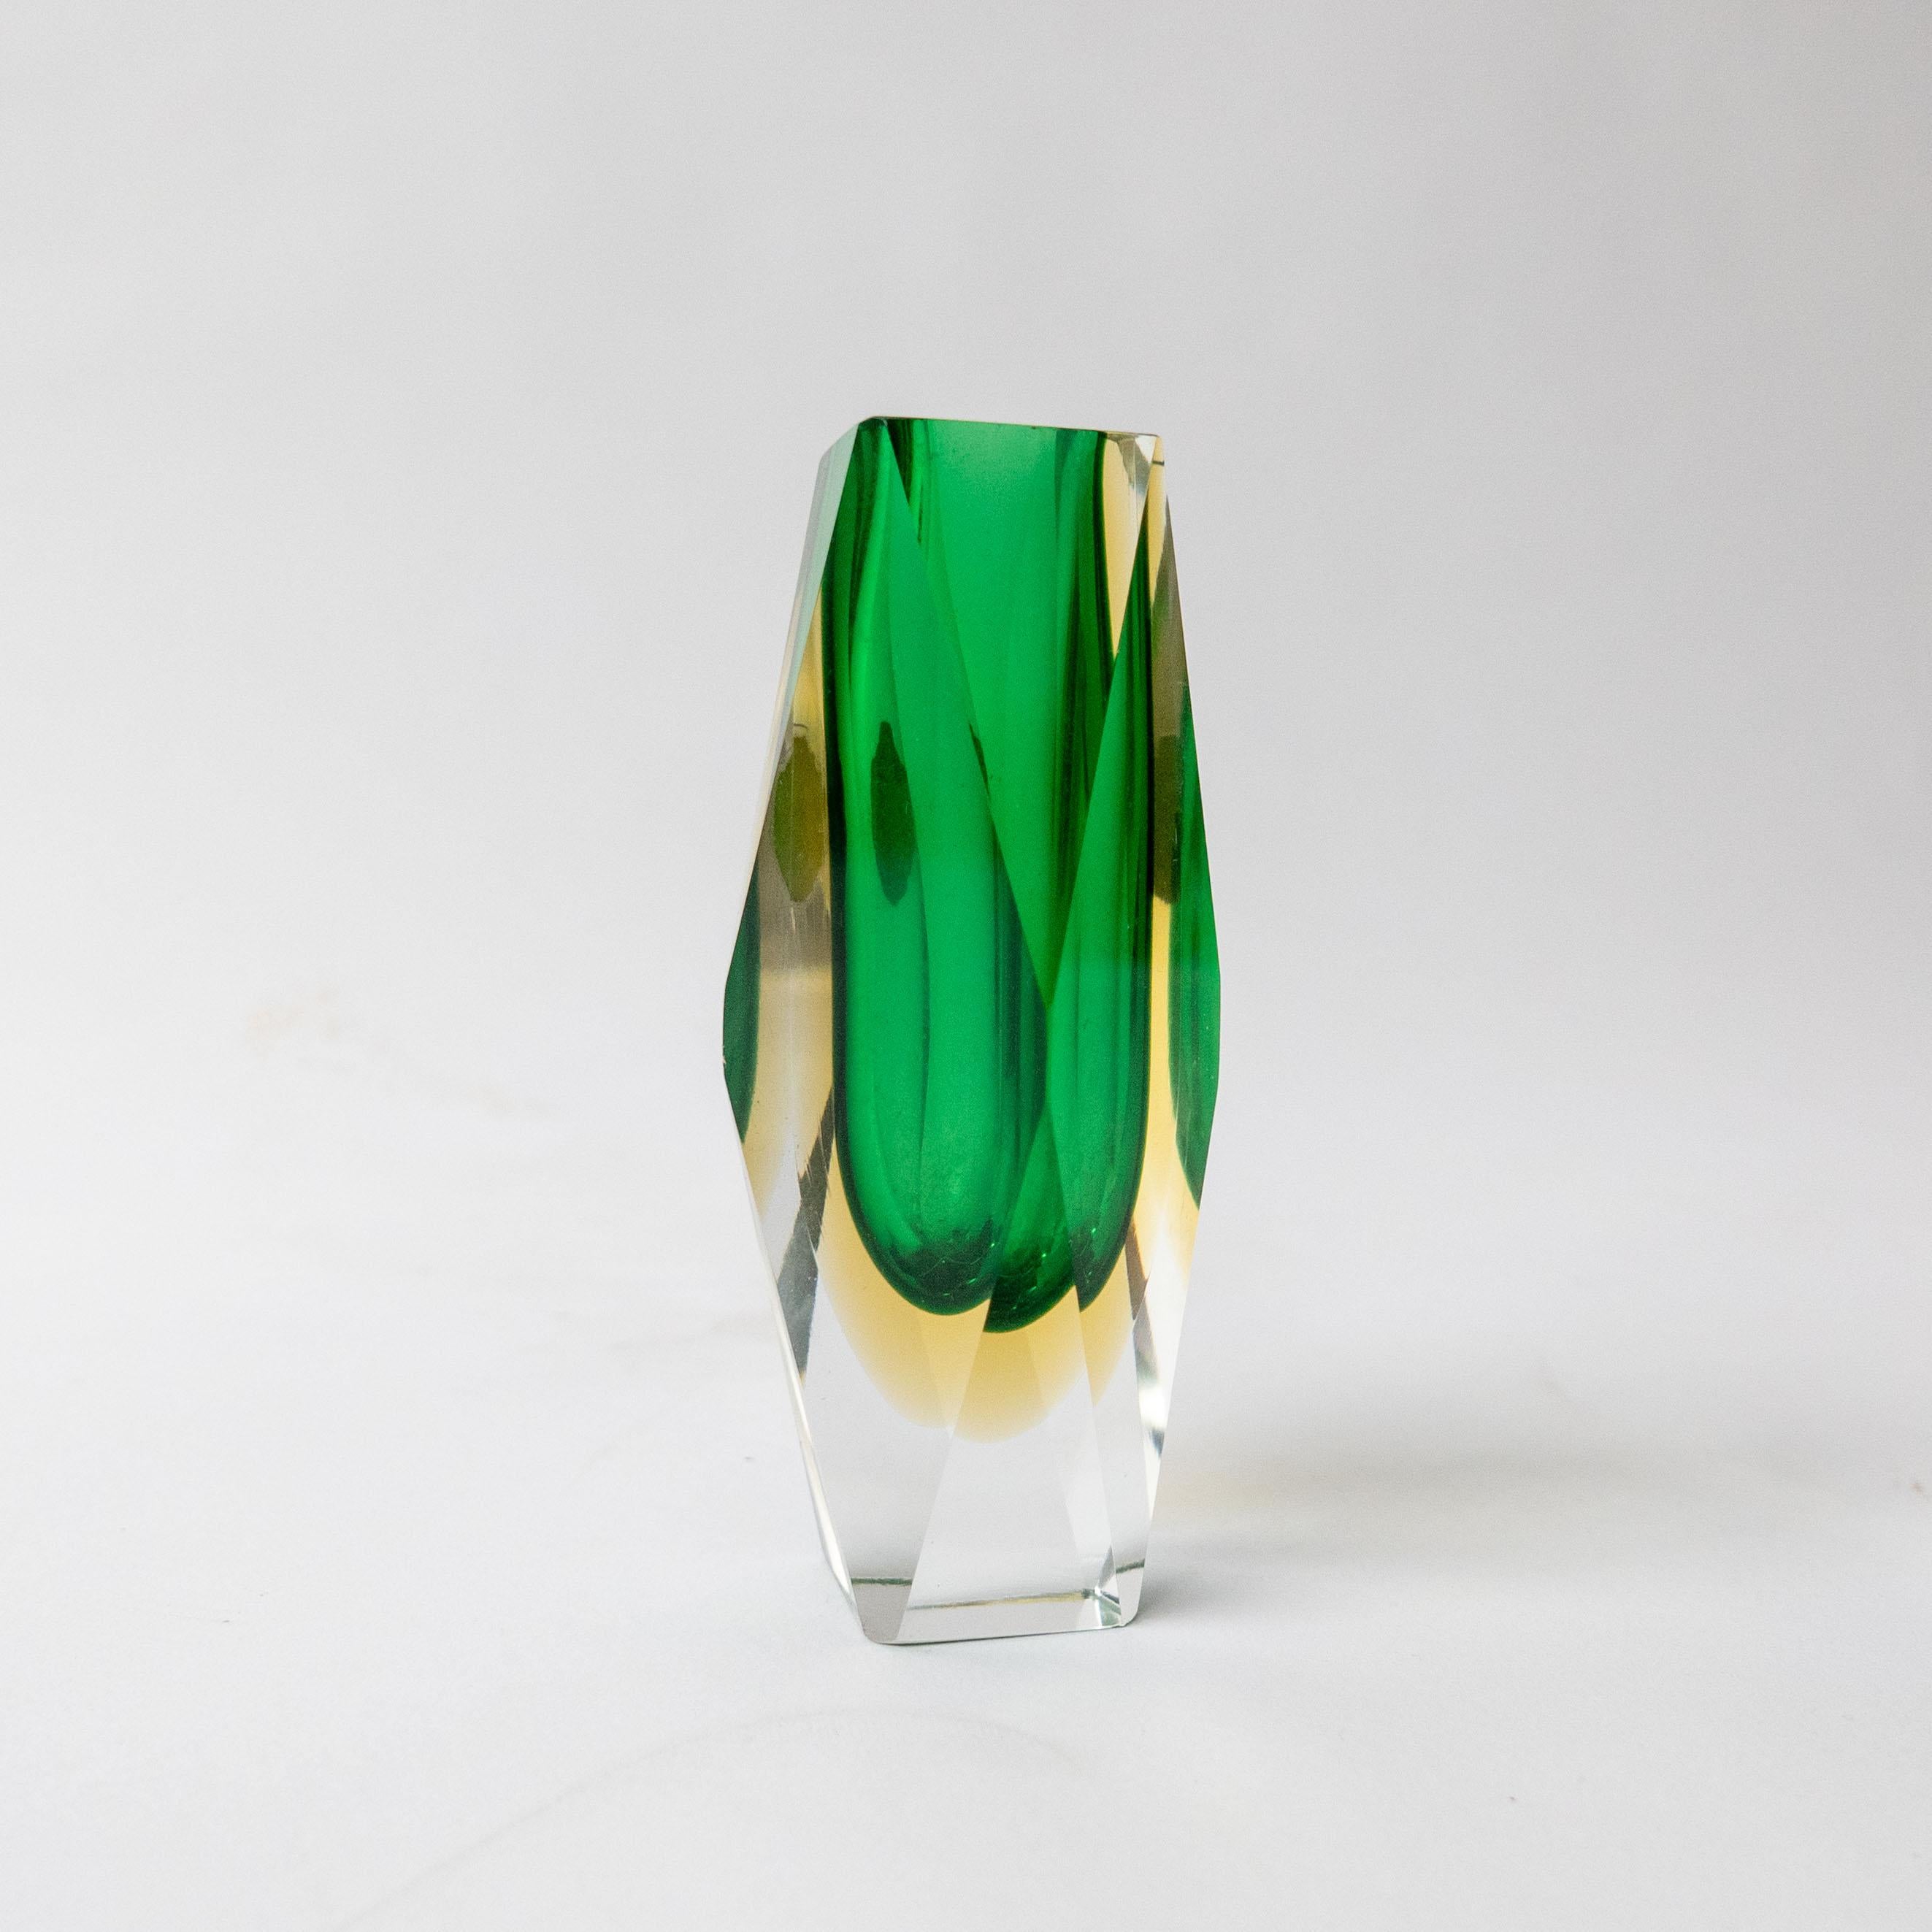 Universally regarded as one of the most prolific and capable designers of Murano glass vases and objects at large, Flavio Poli teamed up with some of the most influential and skilled glass producers of Murano to create timeless design pieces.